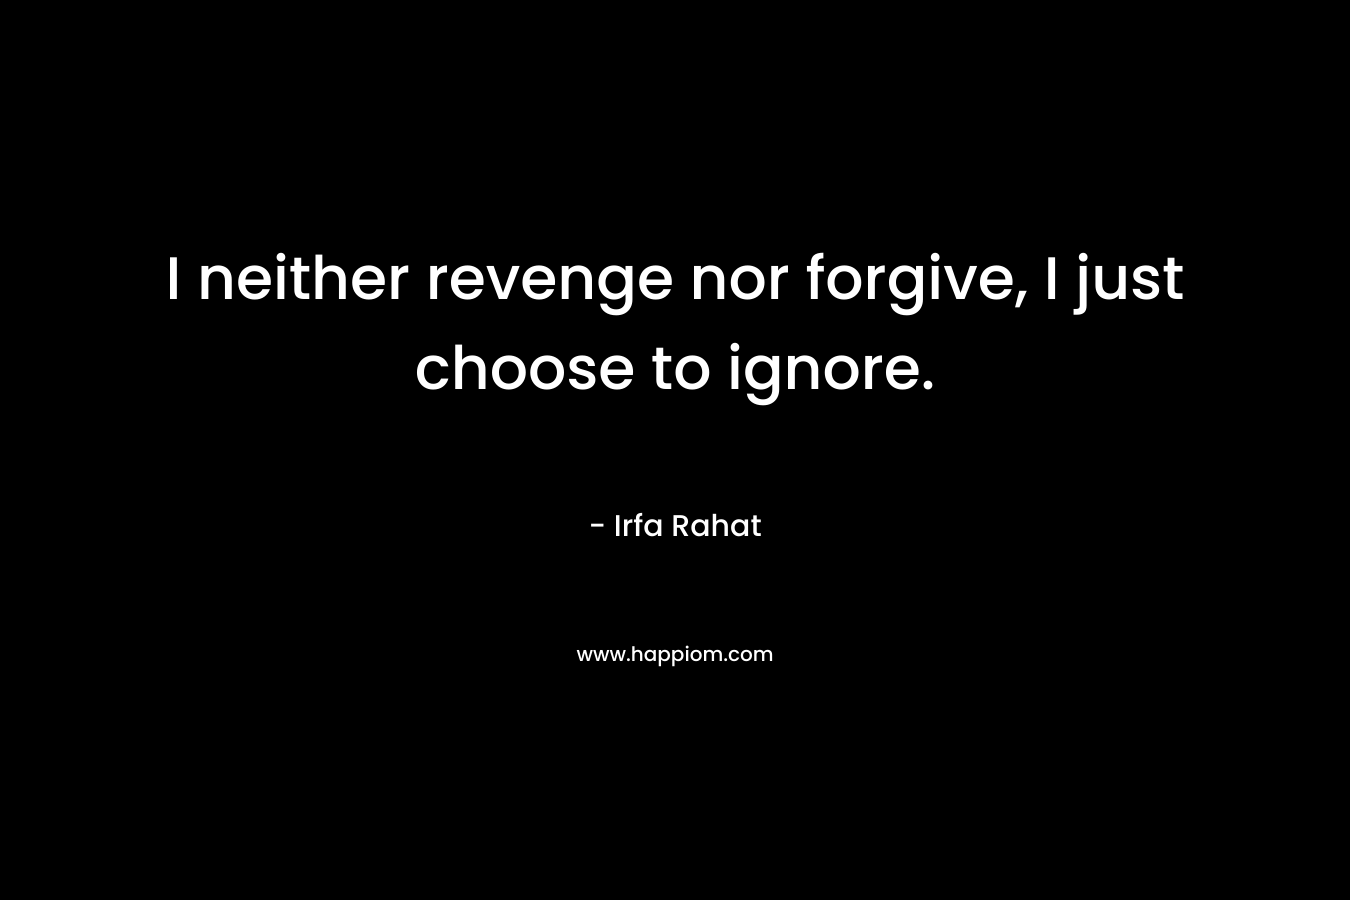 I neither revenge nor forgive, I just choose to ignore.